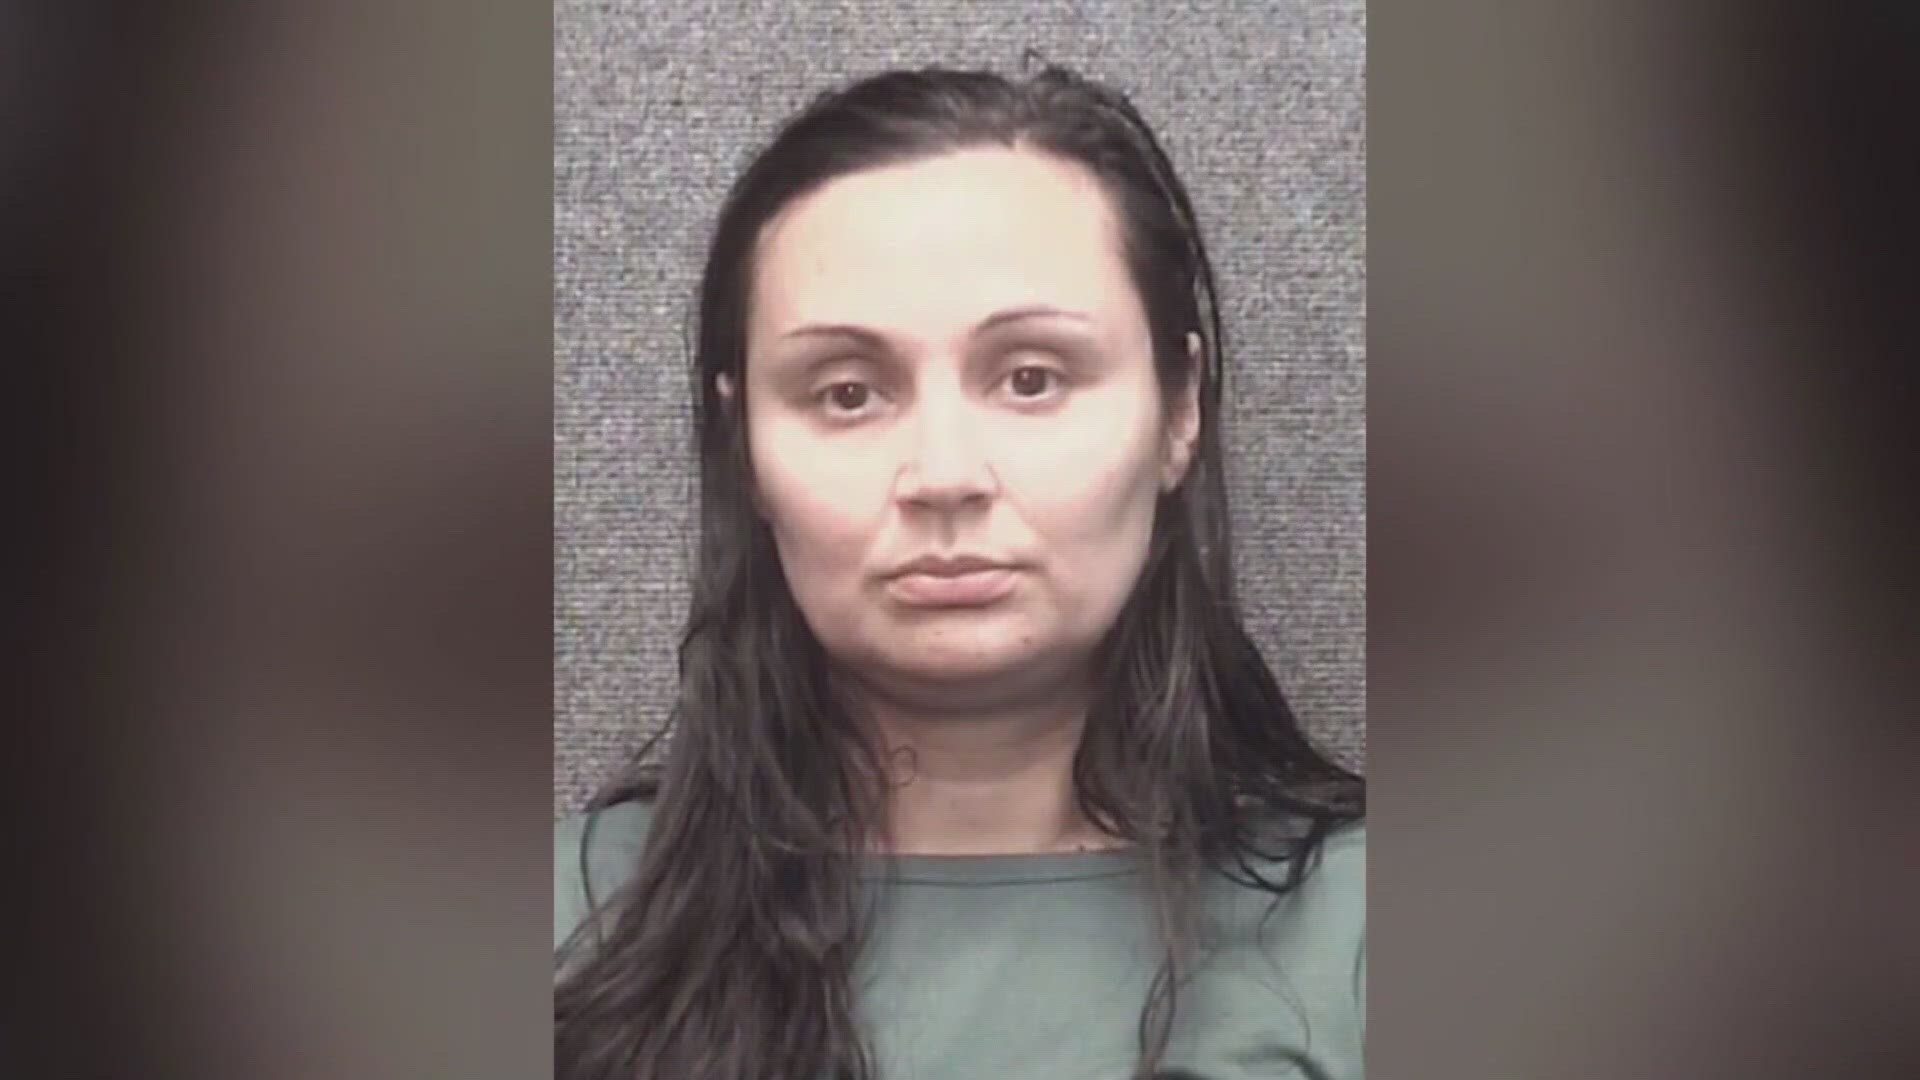 An El Paso County jury reached a verdict Monday in the trial of Letecia Stauch, who was charged in the 2020 killing of her 11-year-old stepson Gannon.